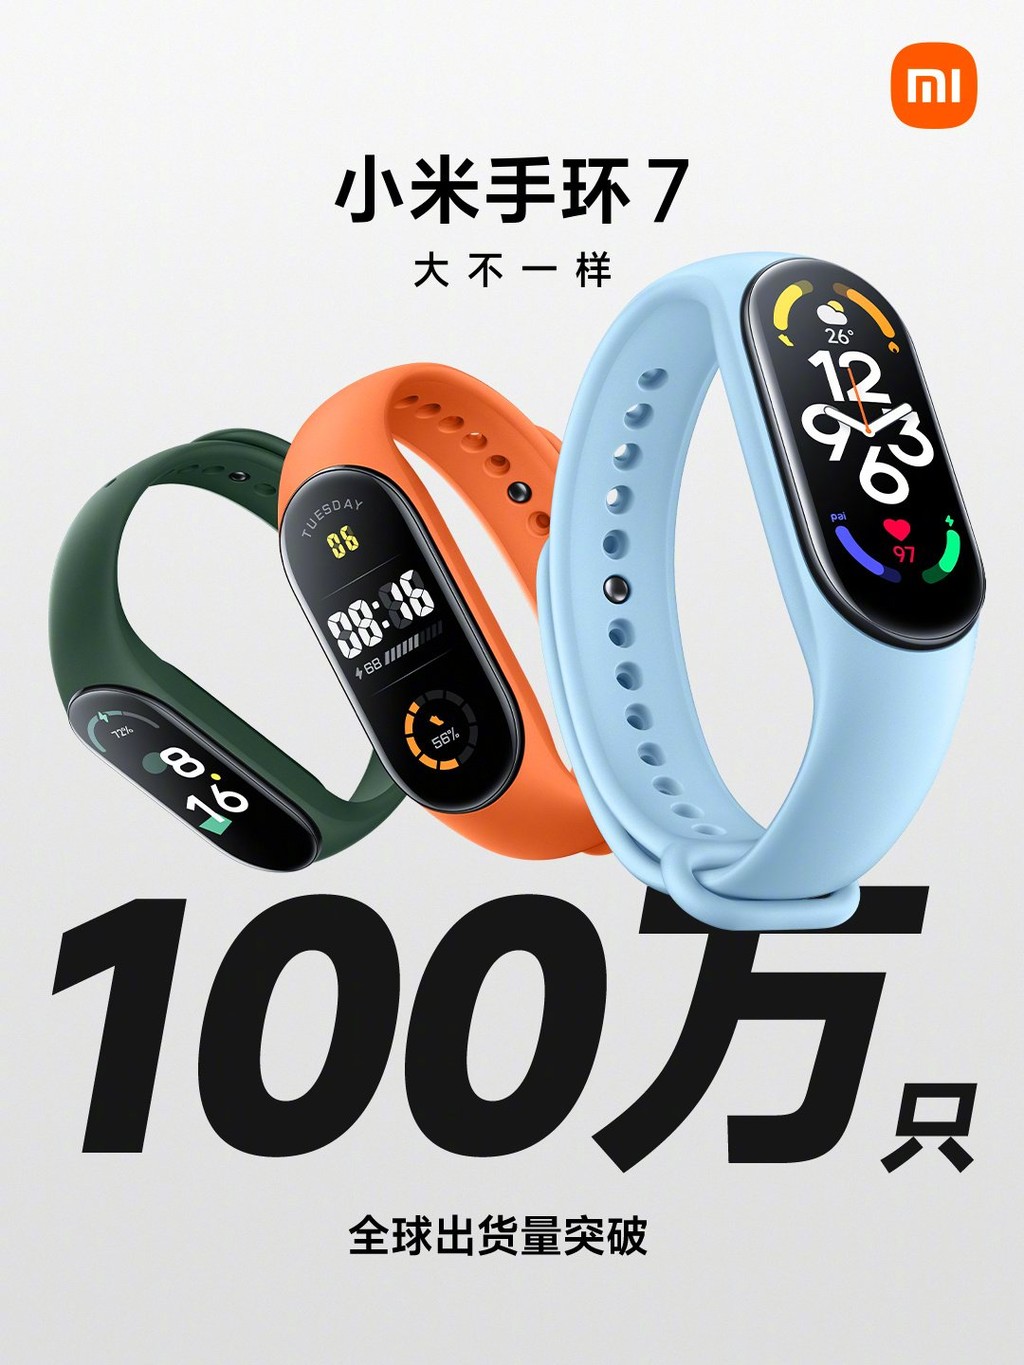 Xiaomi Band 7 sales in China cross 1 million in just under a month - Gizmochina